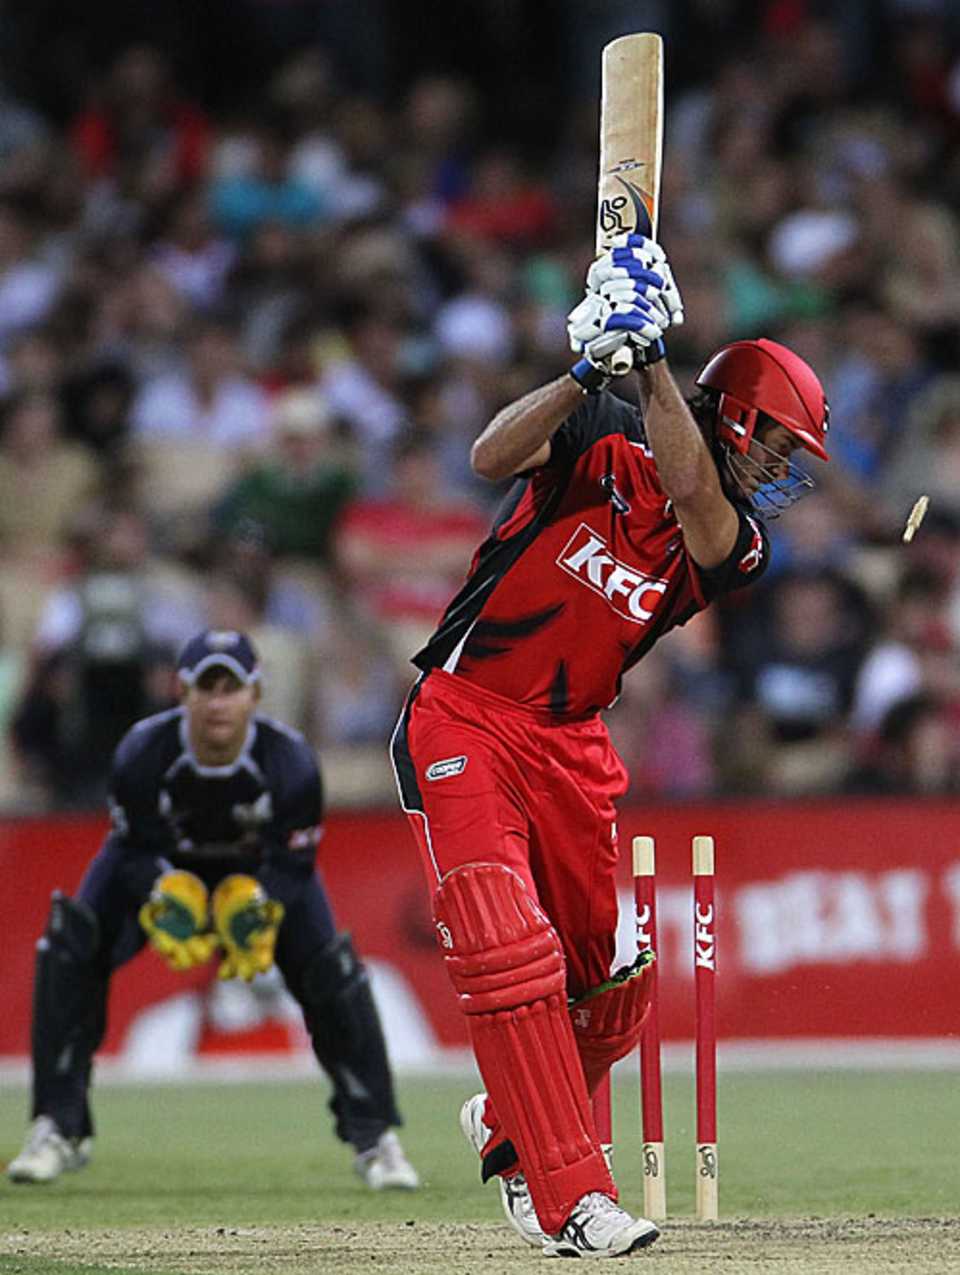 Mark Cleary is bowled by Andrew McDonald, South Australia v Victoria, Twenty20 Big Bash, Final, Adelaide, January 23, 2010